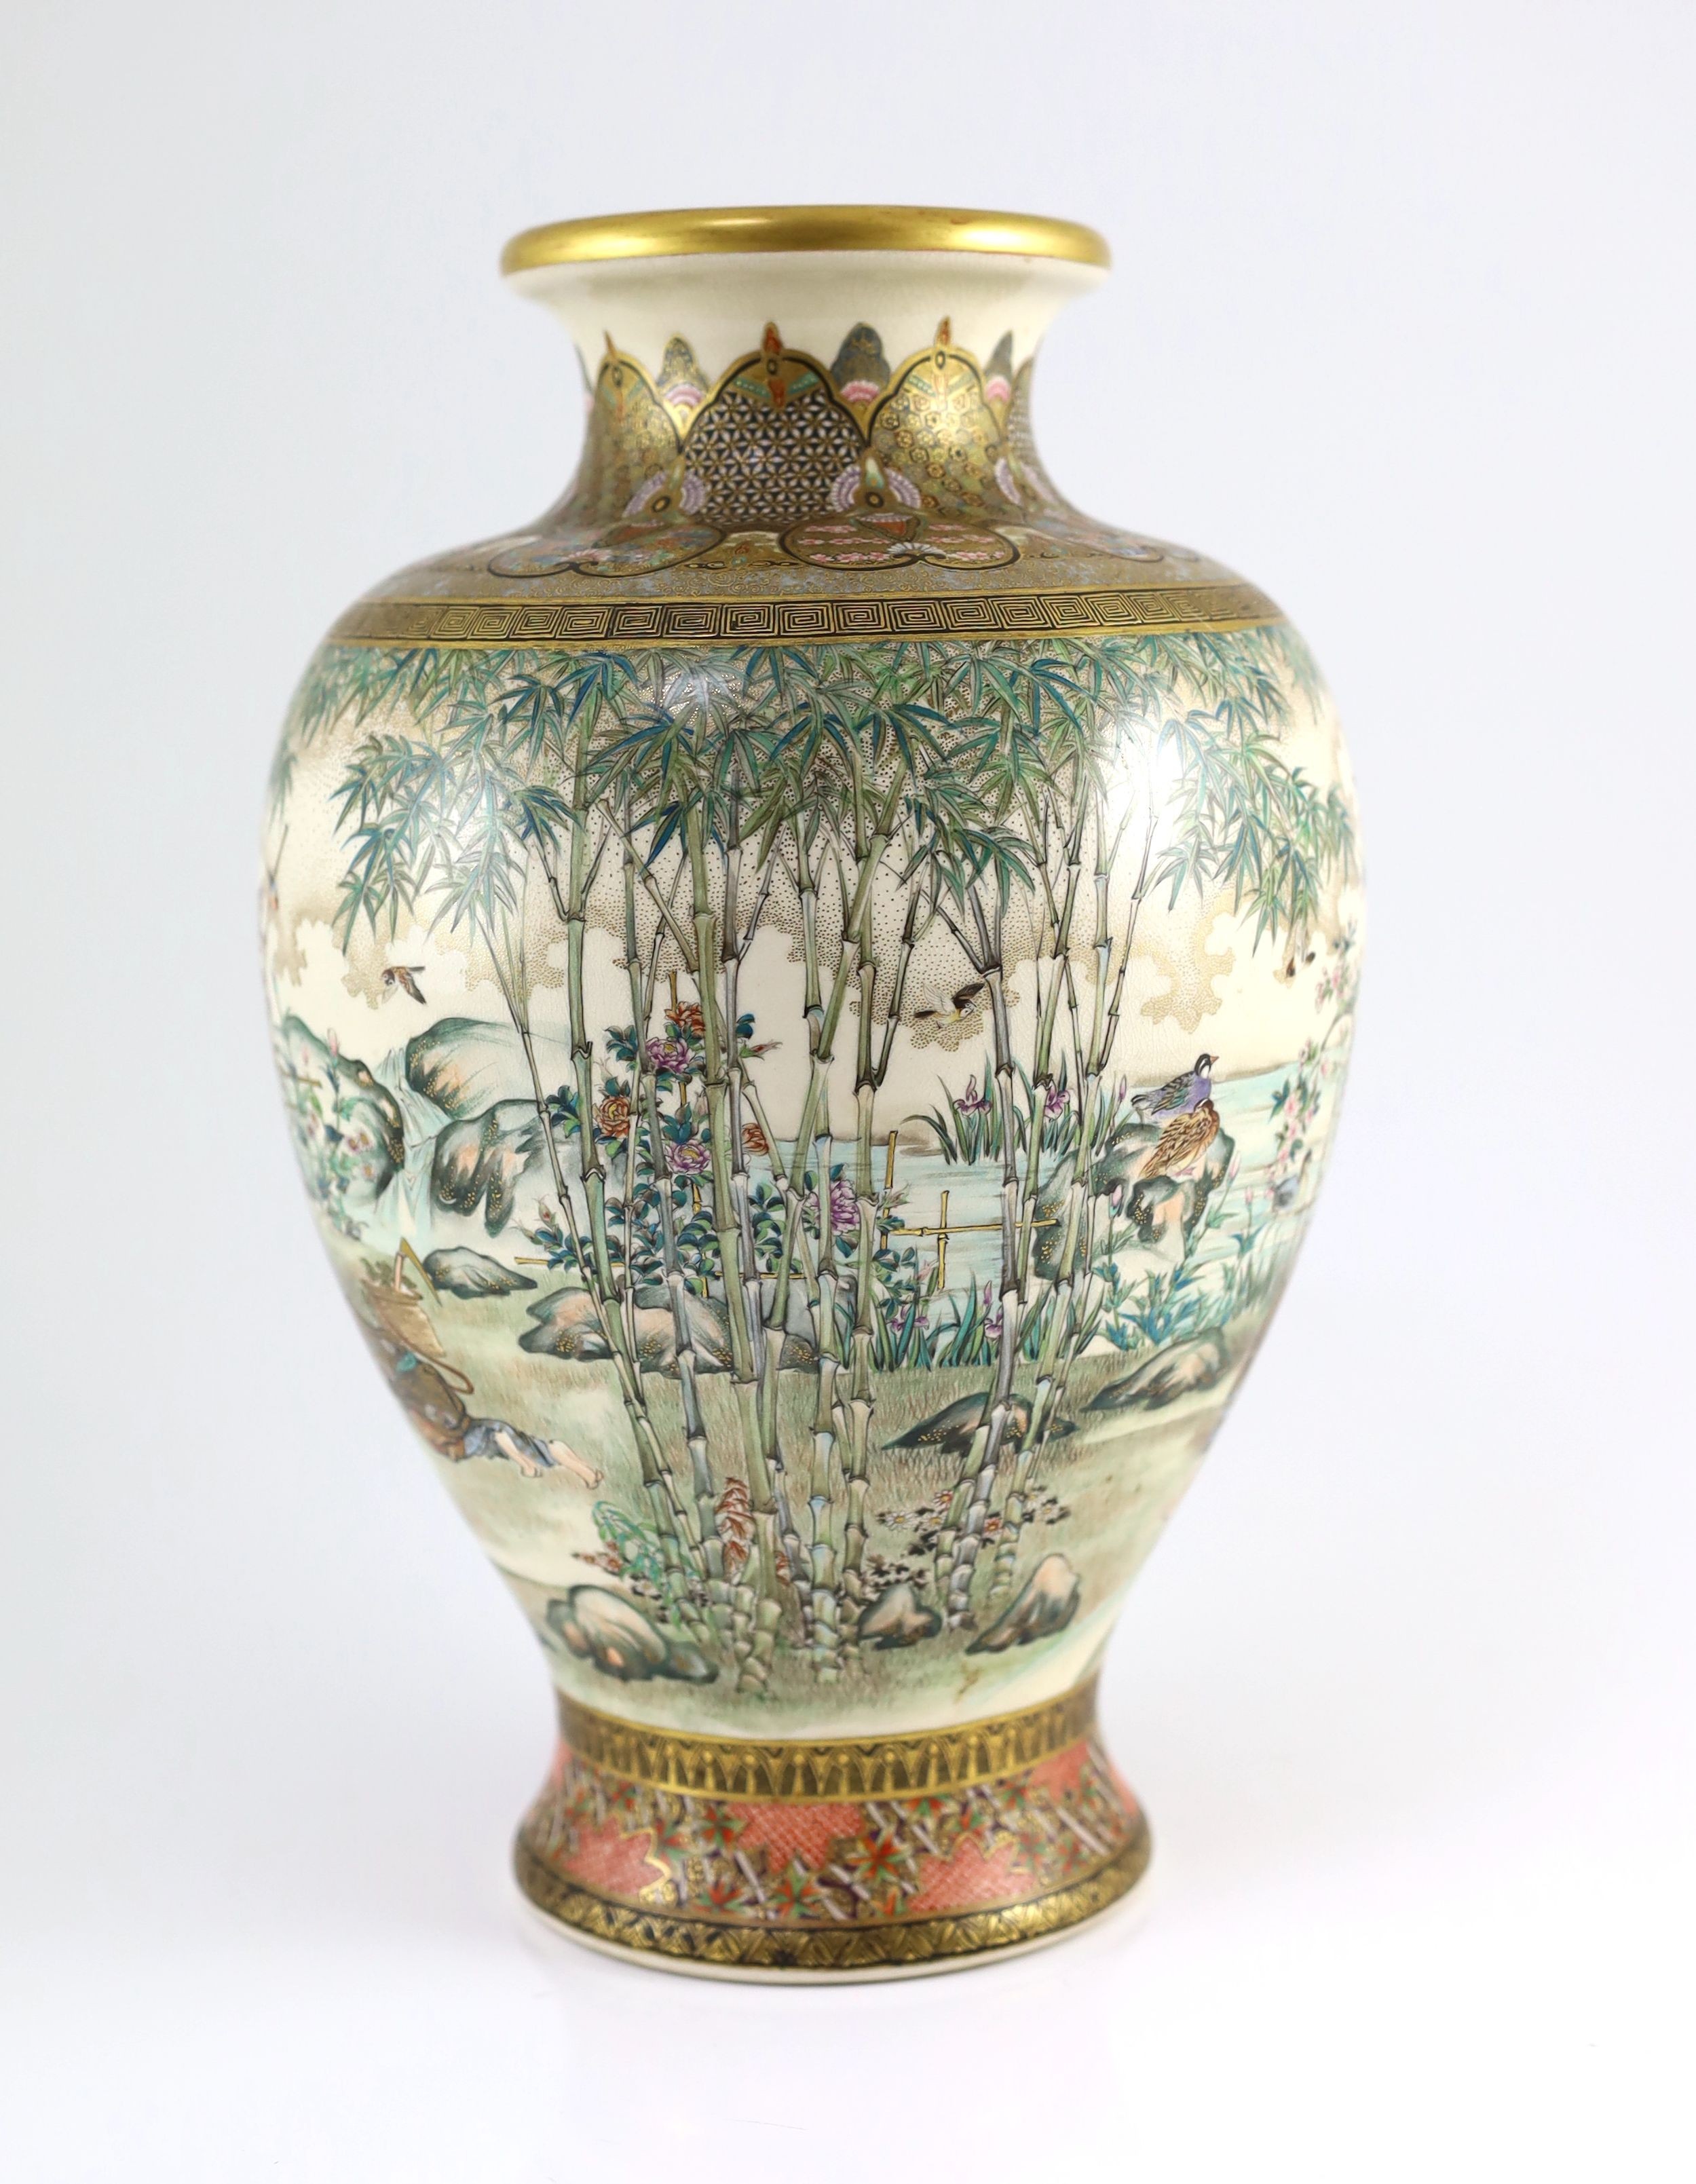 A fine Japanese Satsuma pottery vase, signed Takezan, Meiji period,finely painted with boys in a - Image 4 of 7